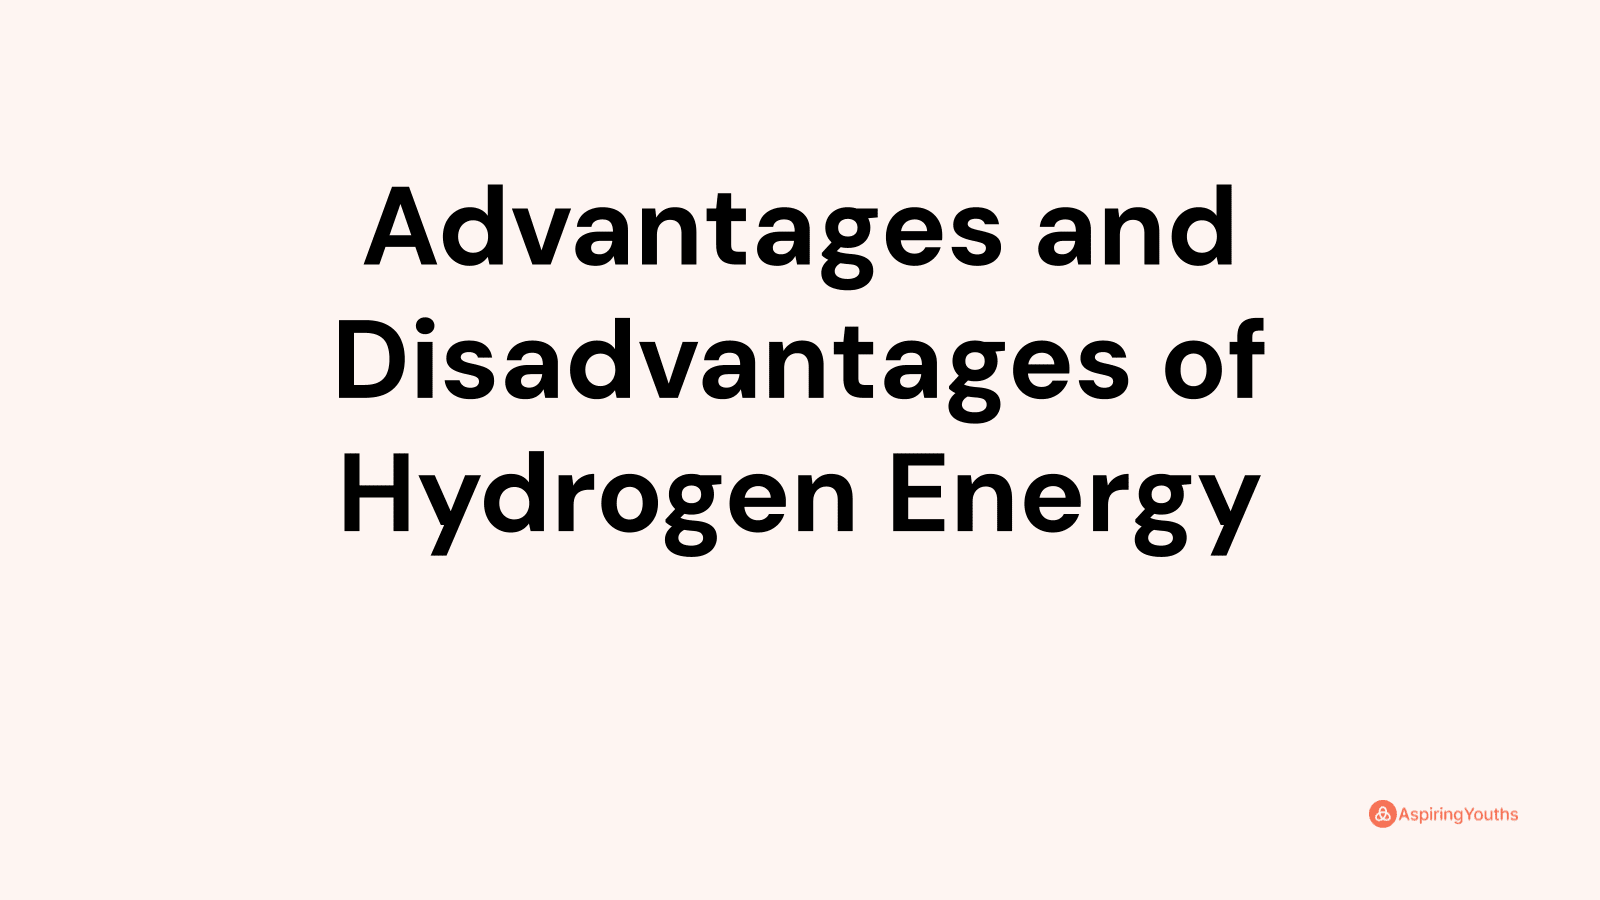 Advantages and disadvantages of Hydrogen Energy